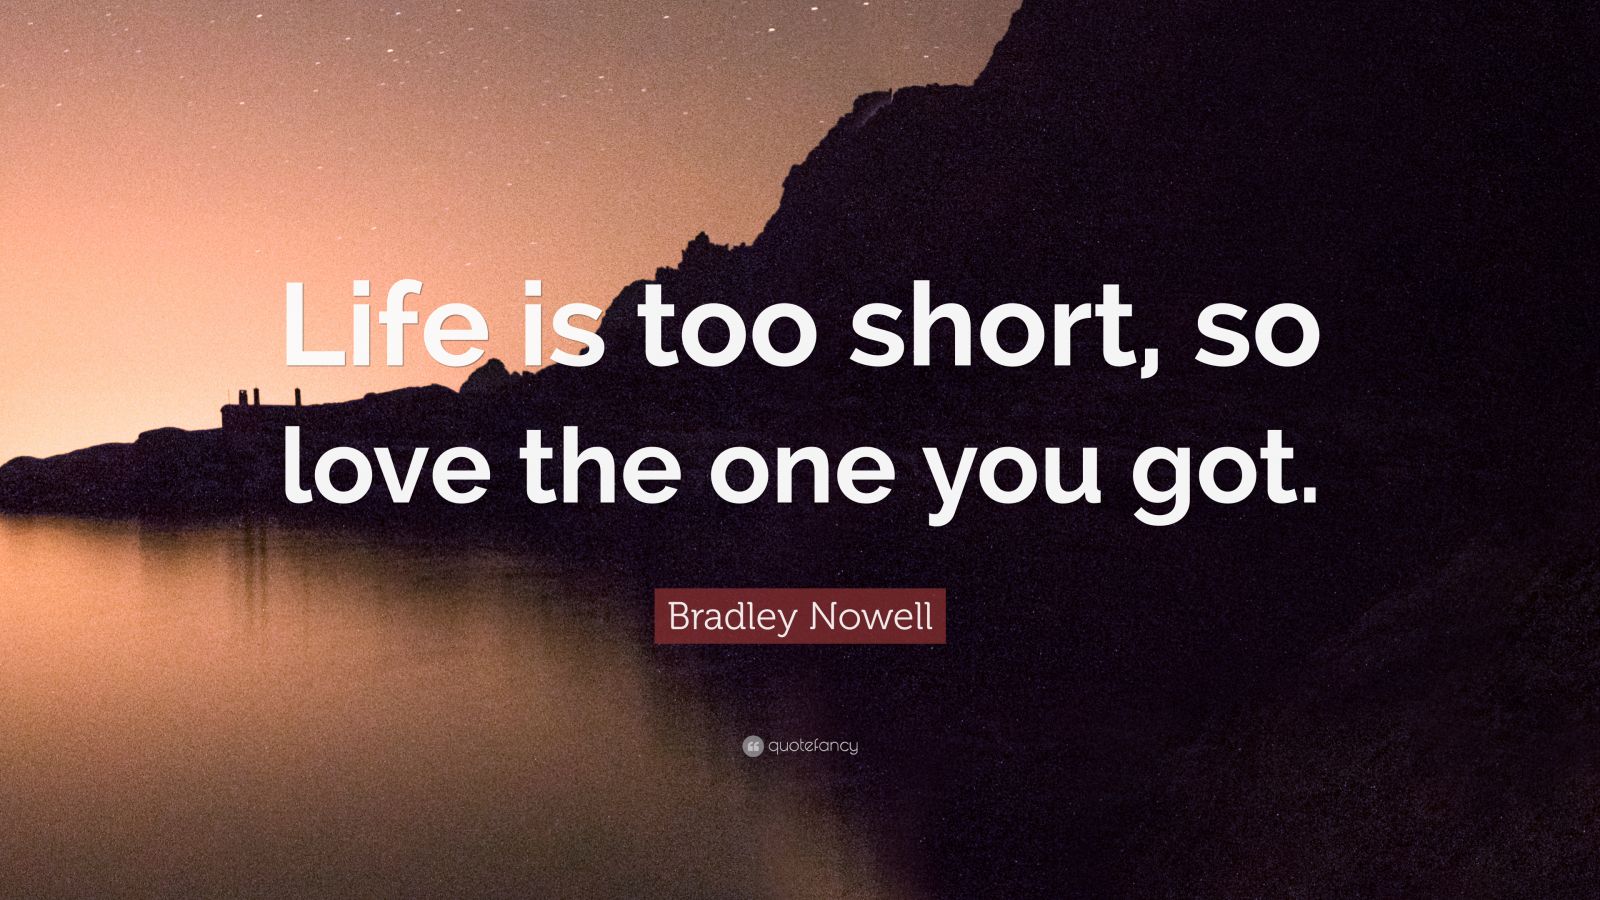 Bradley Nowell Quote: "Life is too short, so love the one you got." (9 wallpapers) - Quotefancy